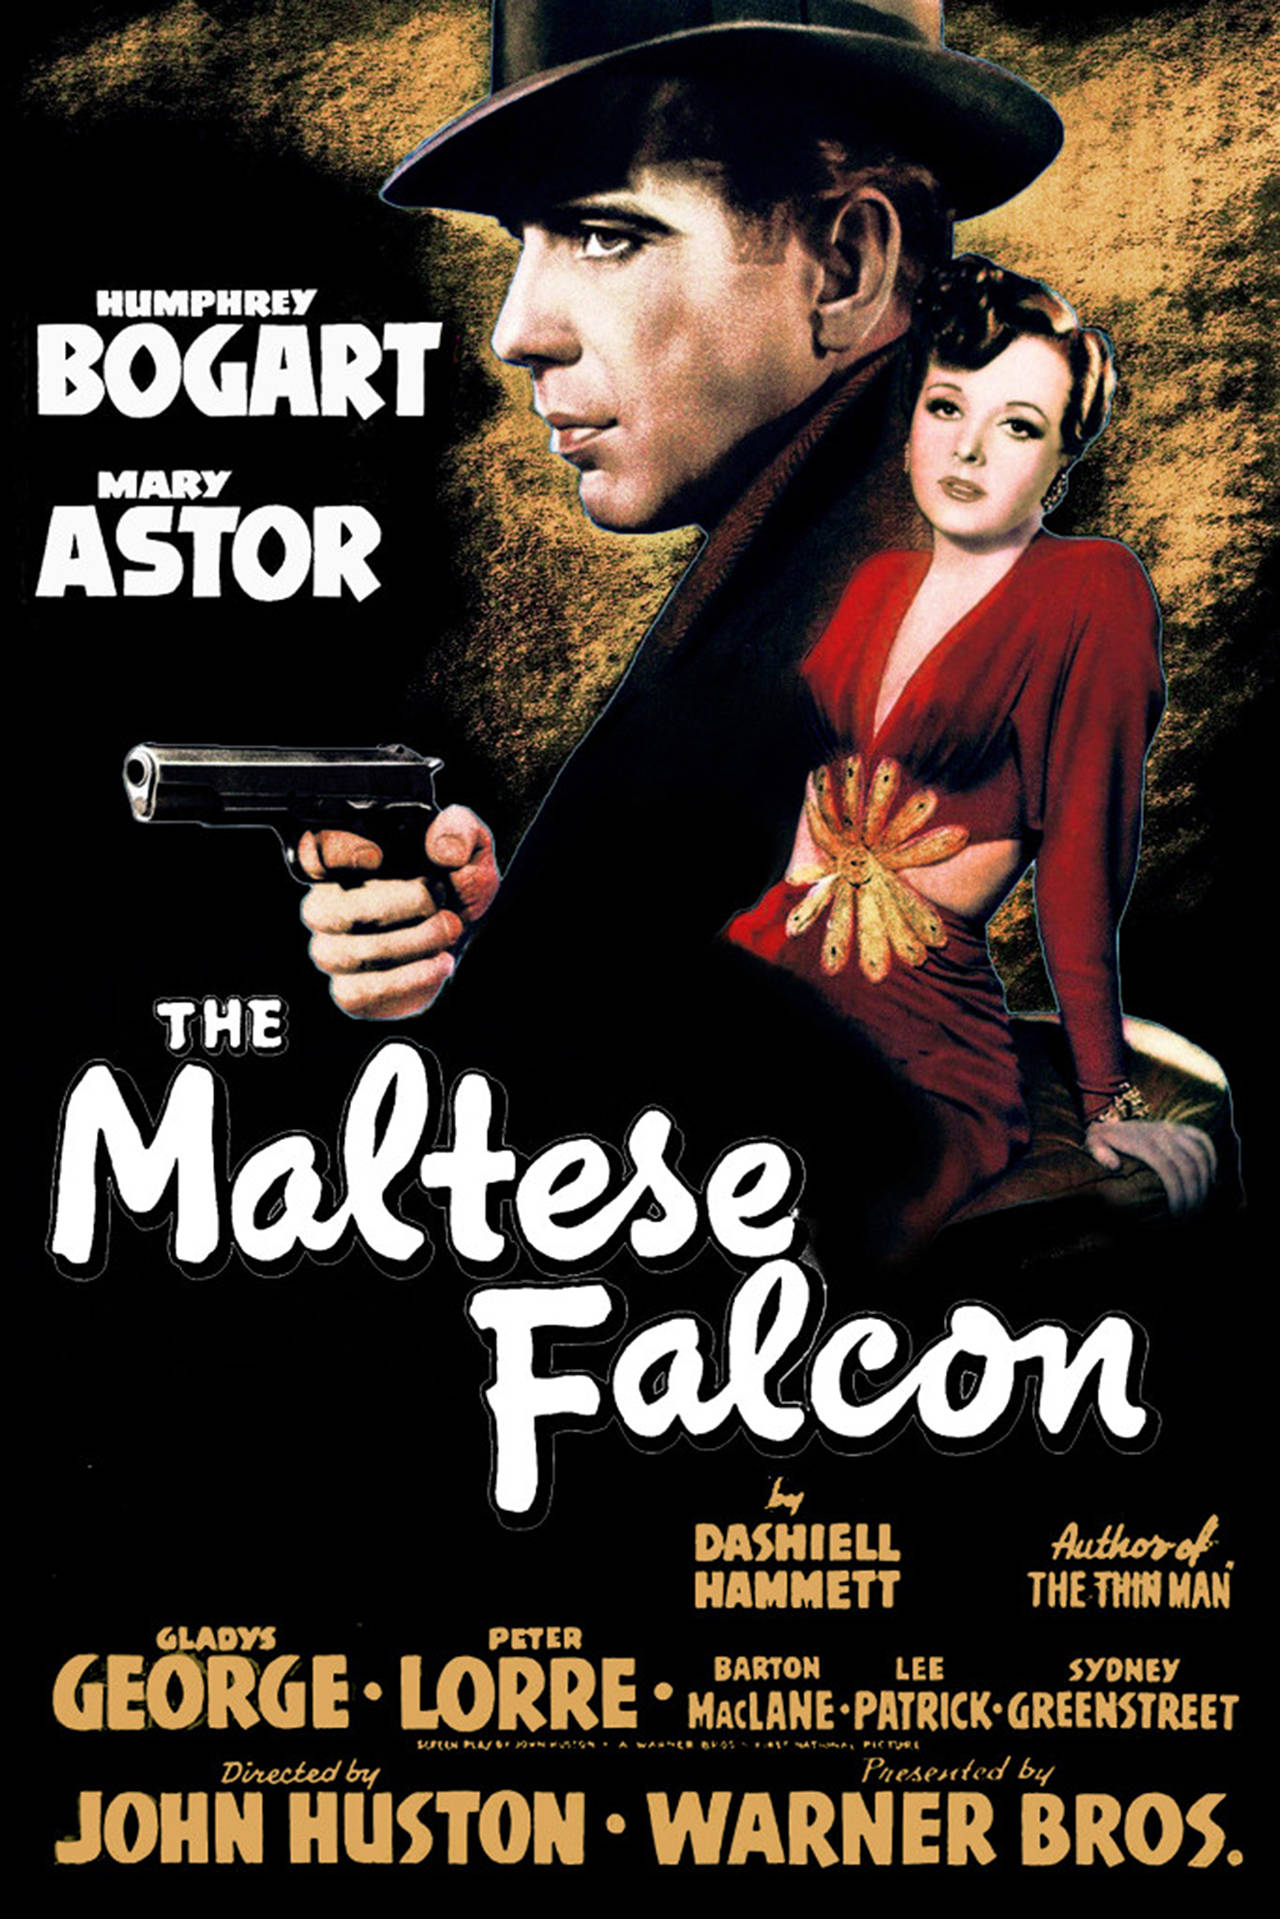 Third time was a charm for “The Maltese Falcon”